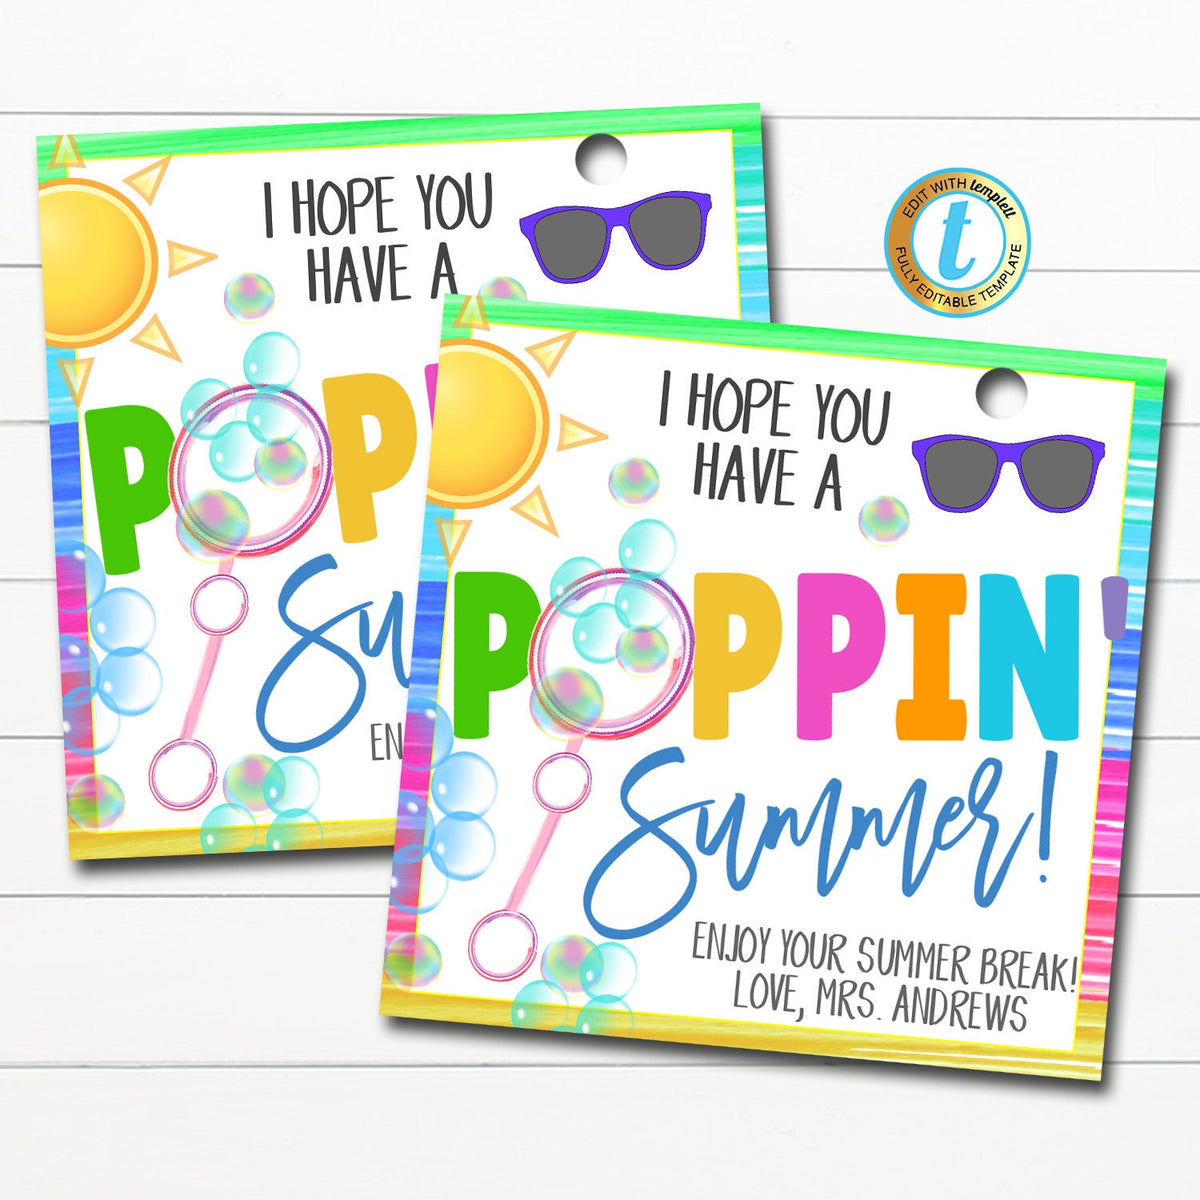 hope-you-have-a-poppin-summer-free-printable